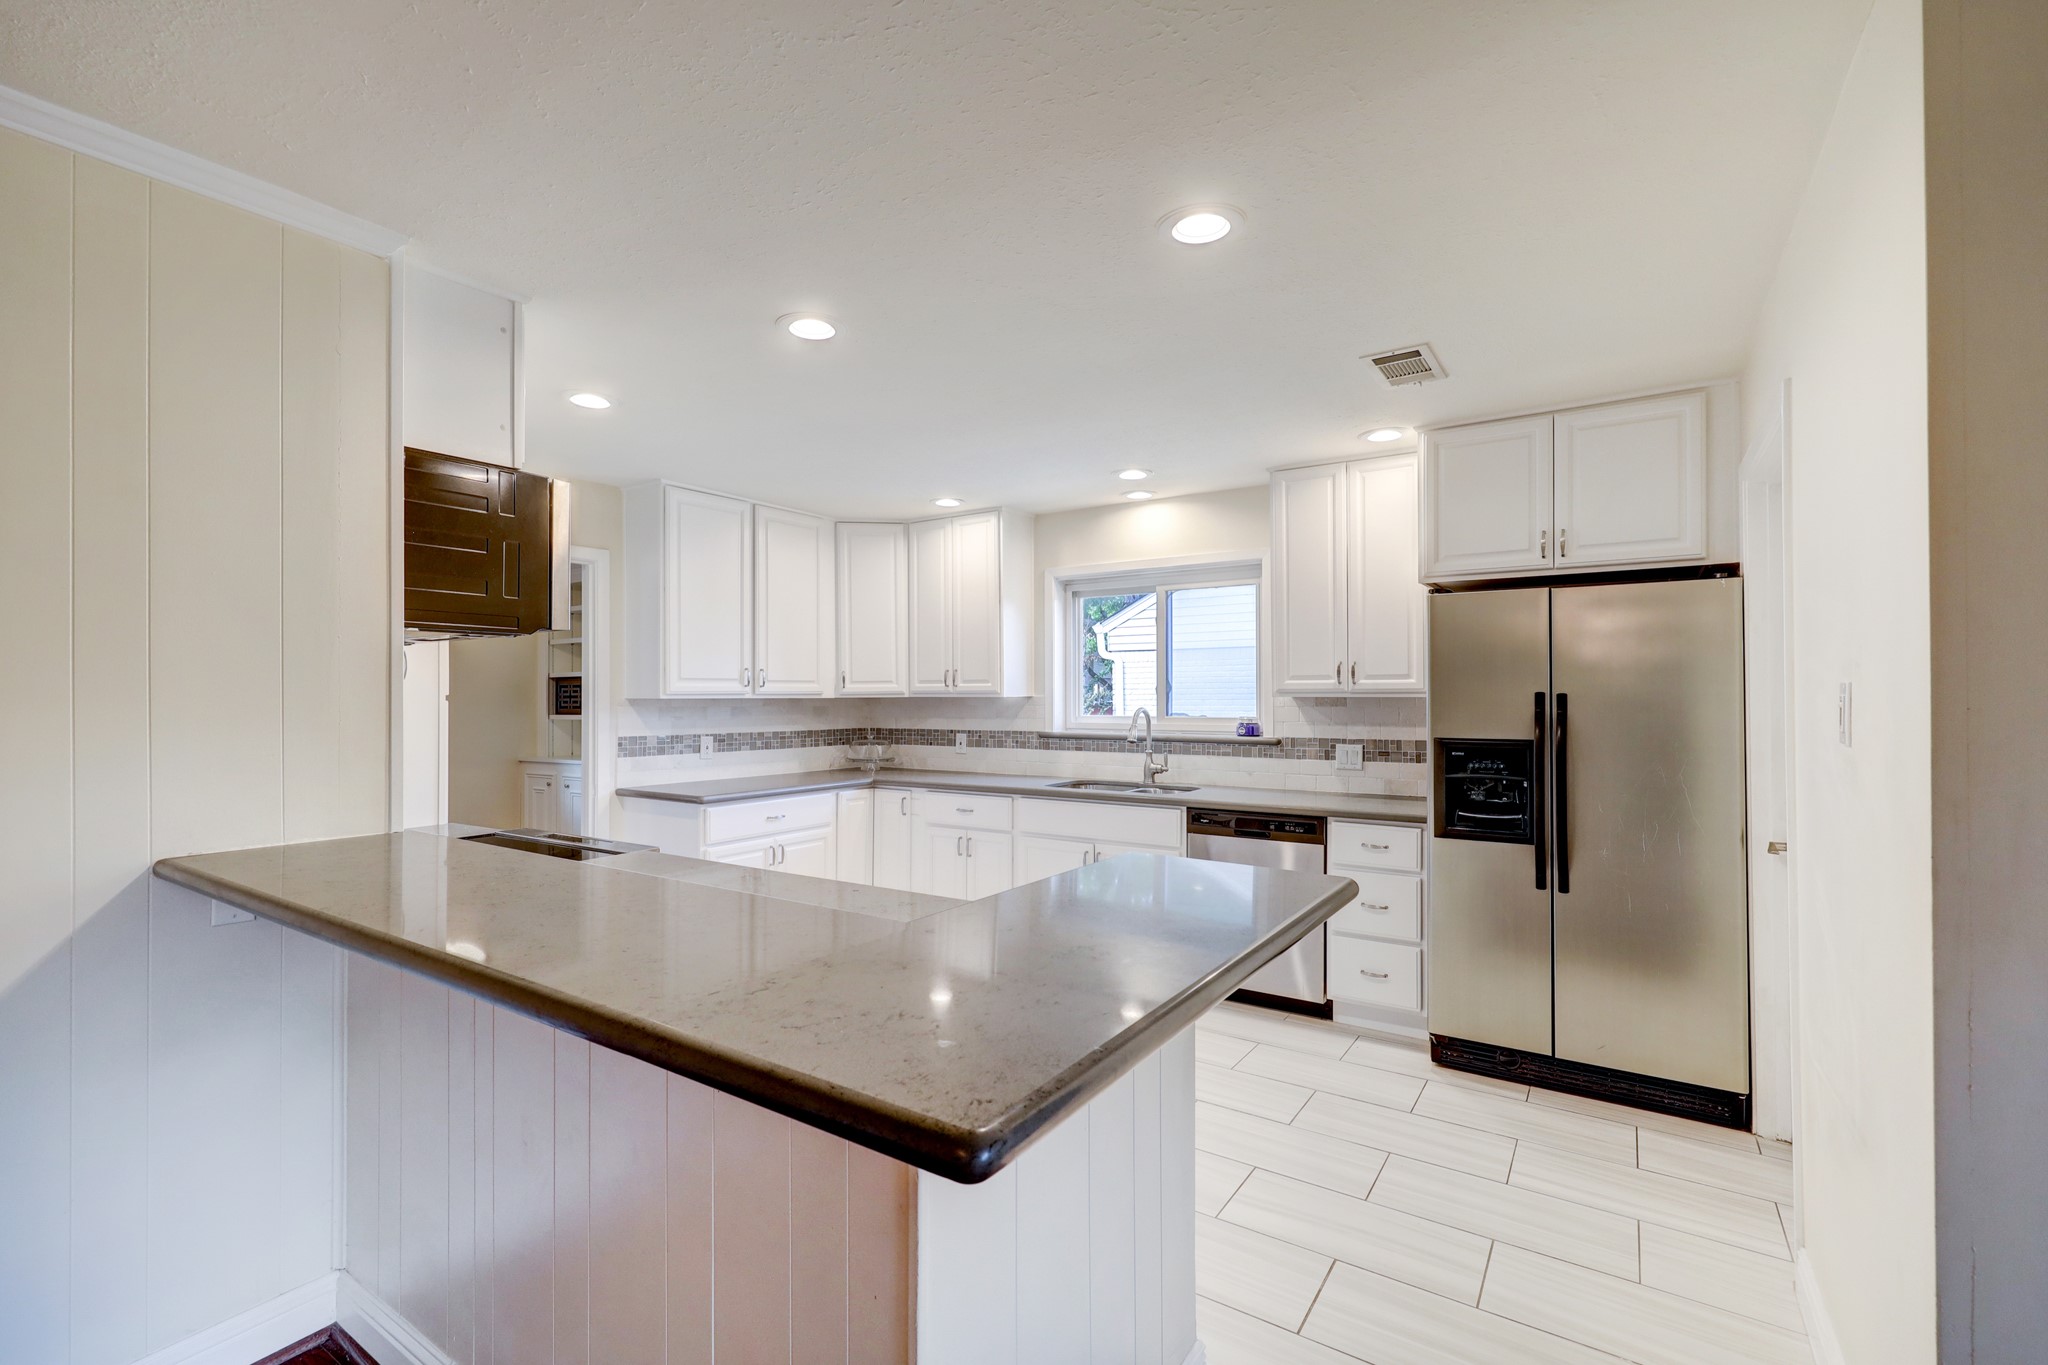 The Kitchen has been thoughtfully updated with modern conveniences!